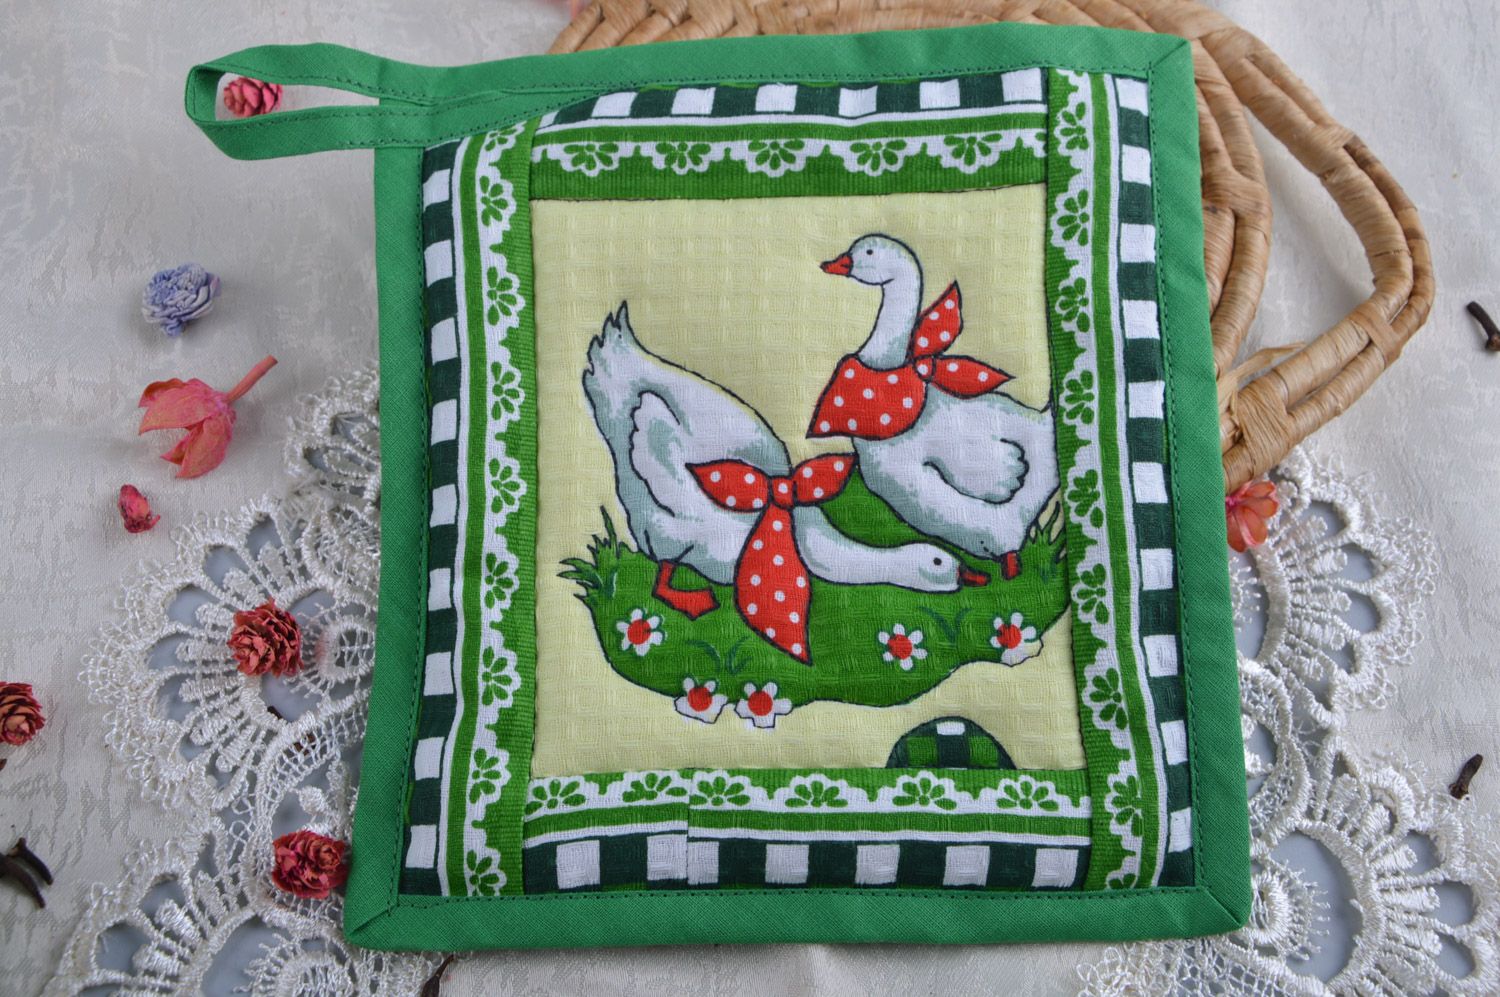 Handmade square pot holder sewn of cotton with geese image in green color palette photo 3